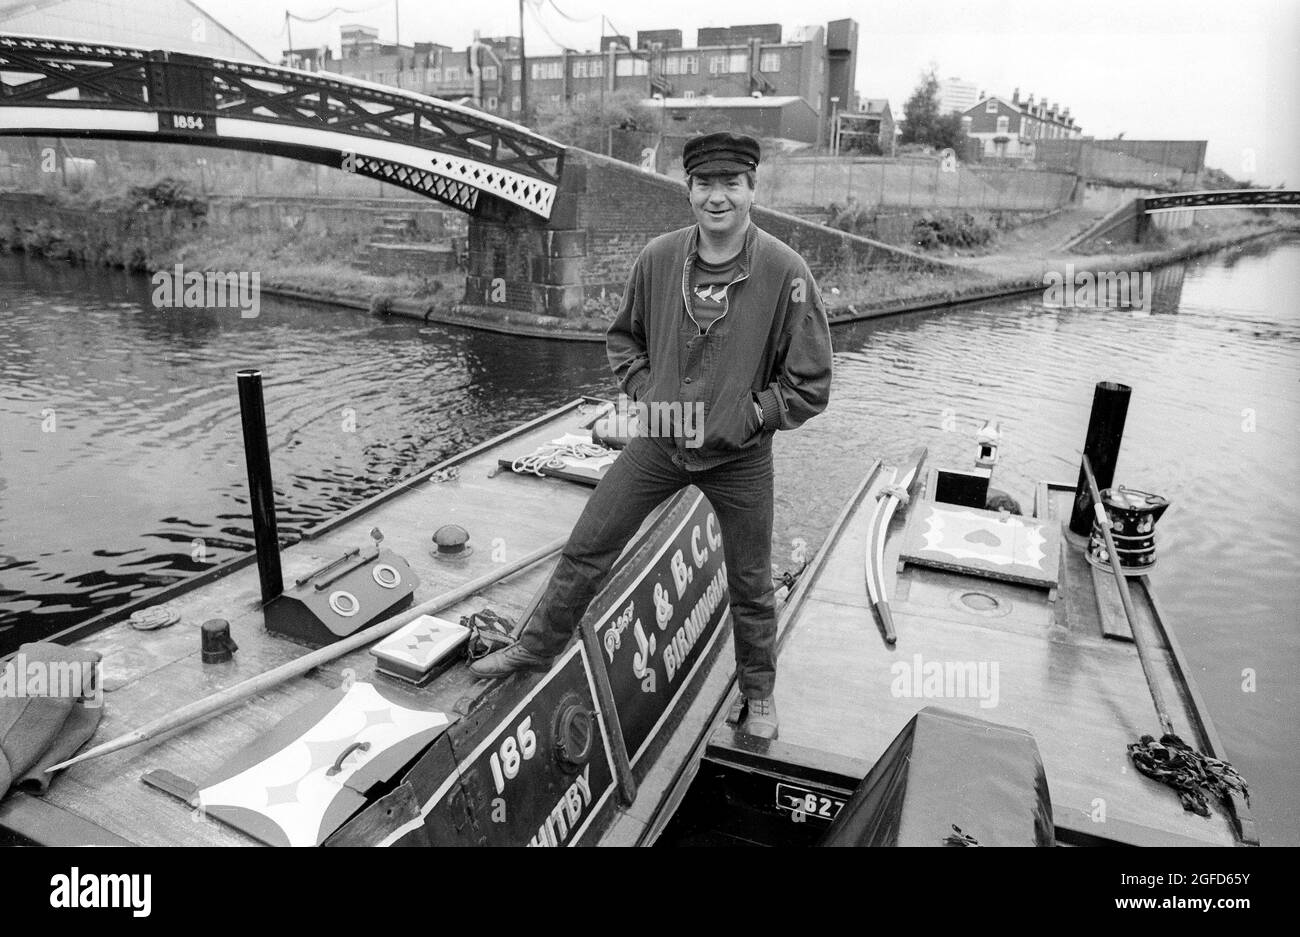 Astride two narrow boats in the Birmingham canals actor Michael Elphick as BOON the leading character for the Central TV series BOON in 1985 takes time of from filming to enjoy the life on canal craft. Stock Photo